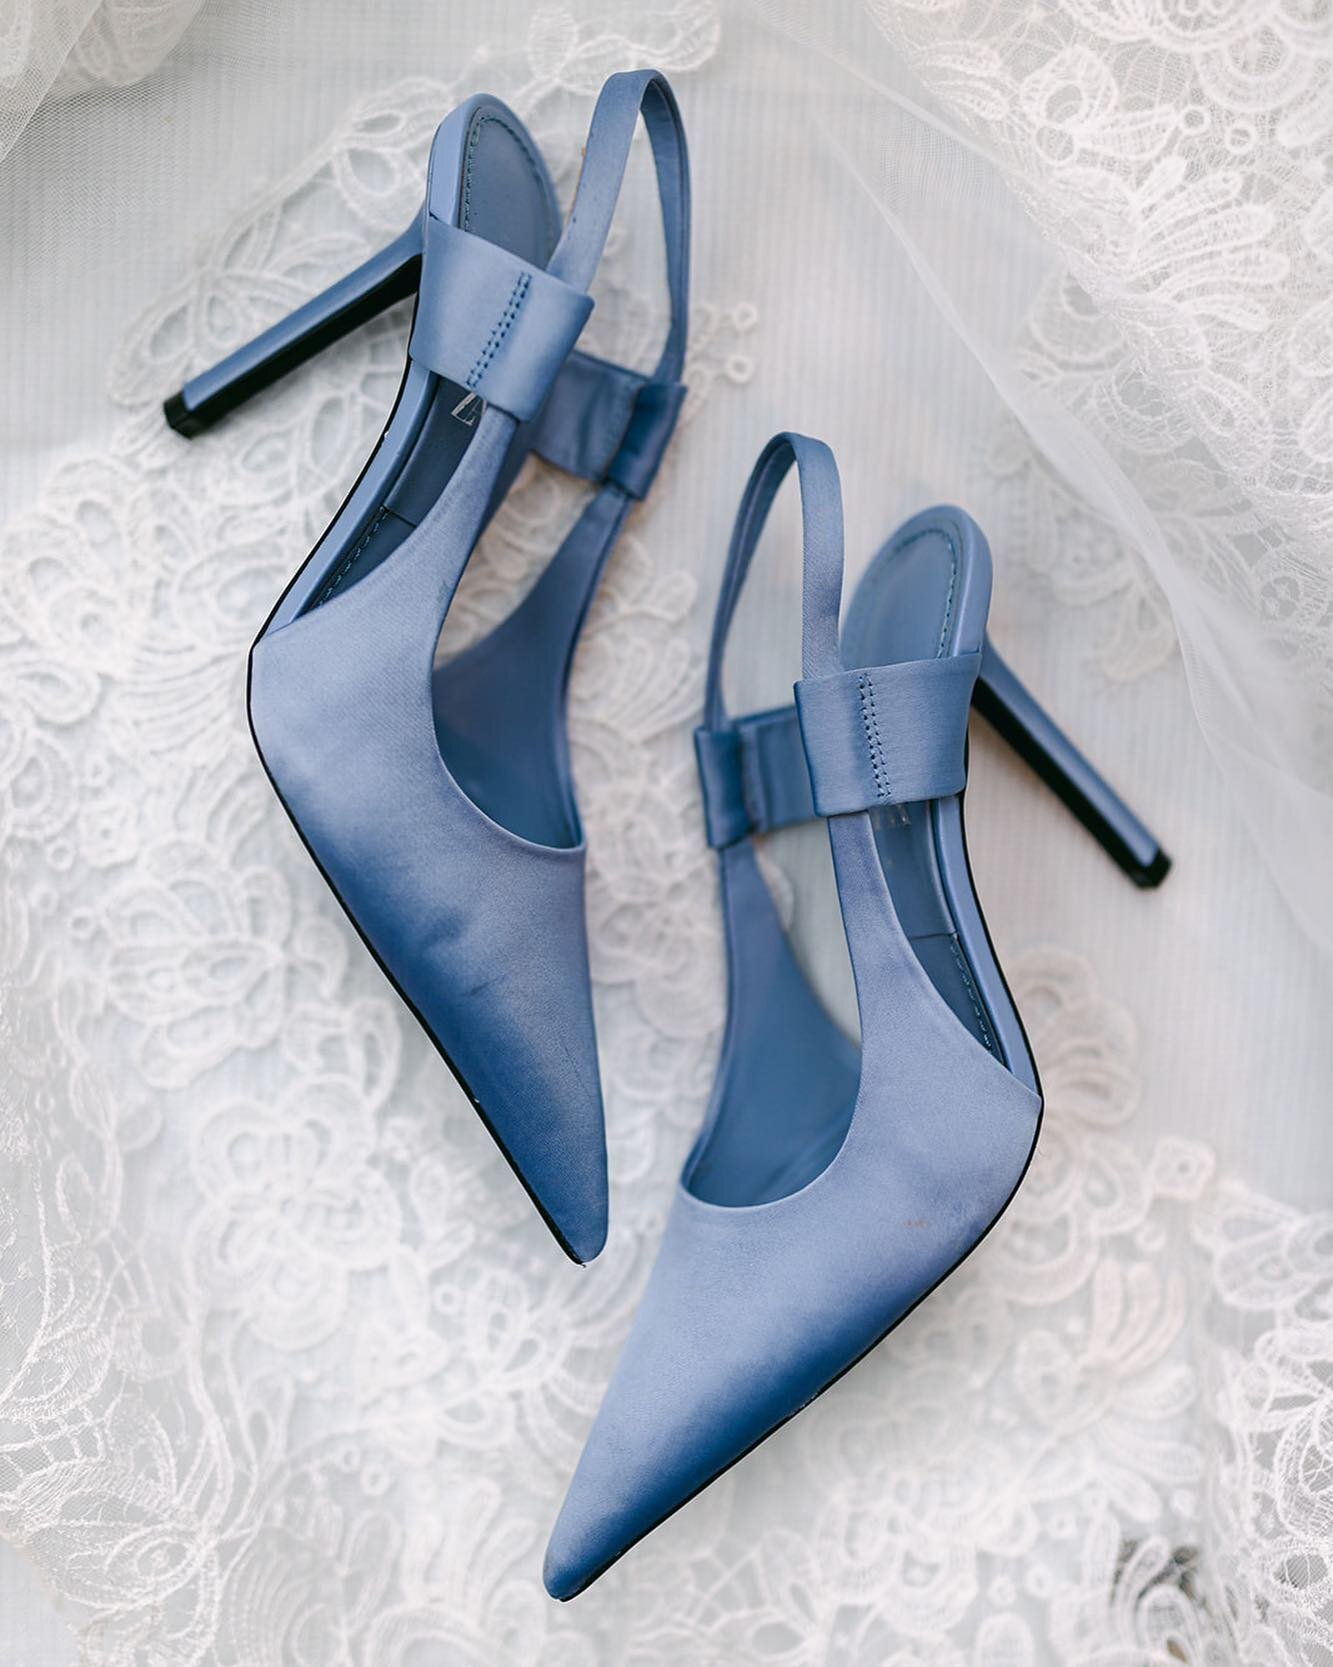 A little commotion for the blue wedding shoes 💙🦋🌀

Photographer: @larisashorinaphotography